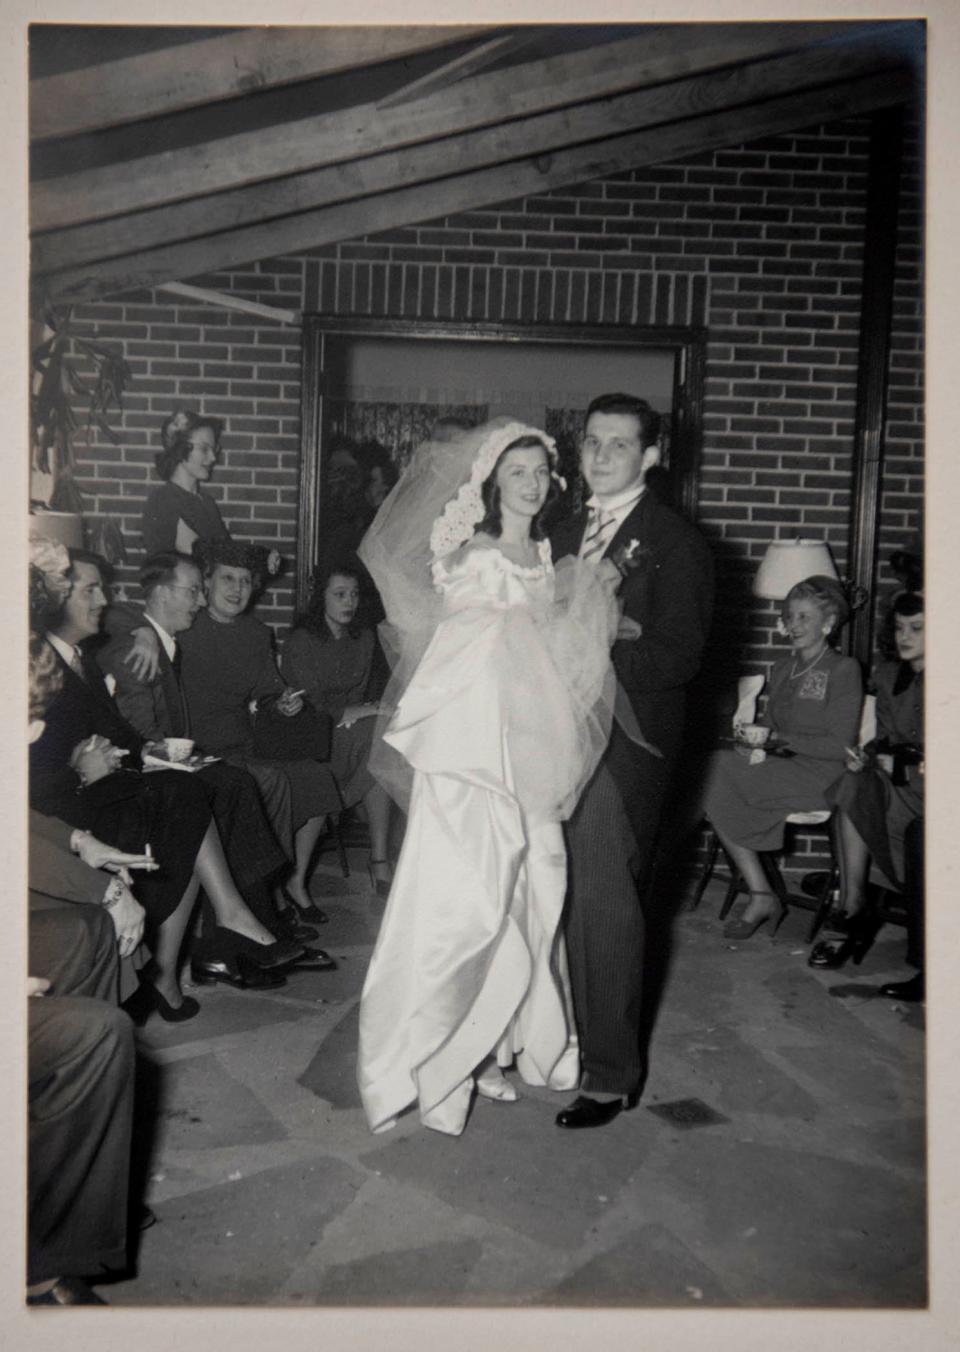 Blanche and Ralph Del Deo on their wedding day in November 1947.